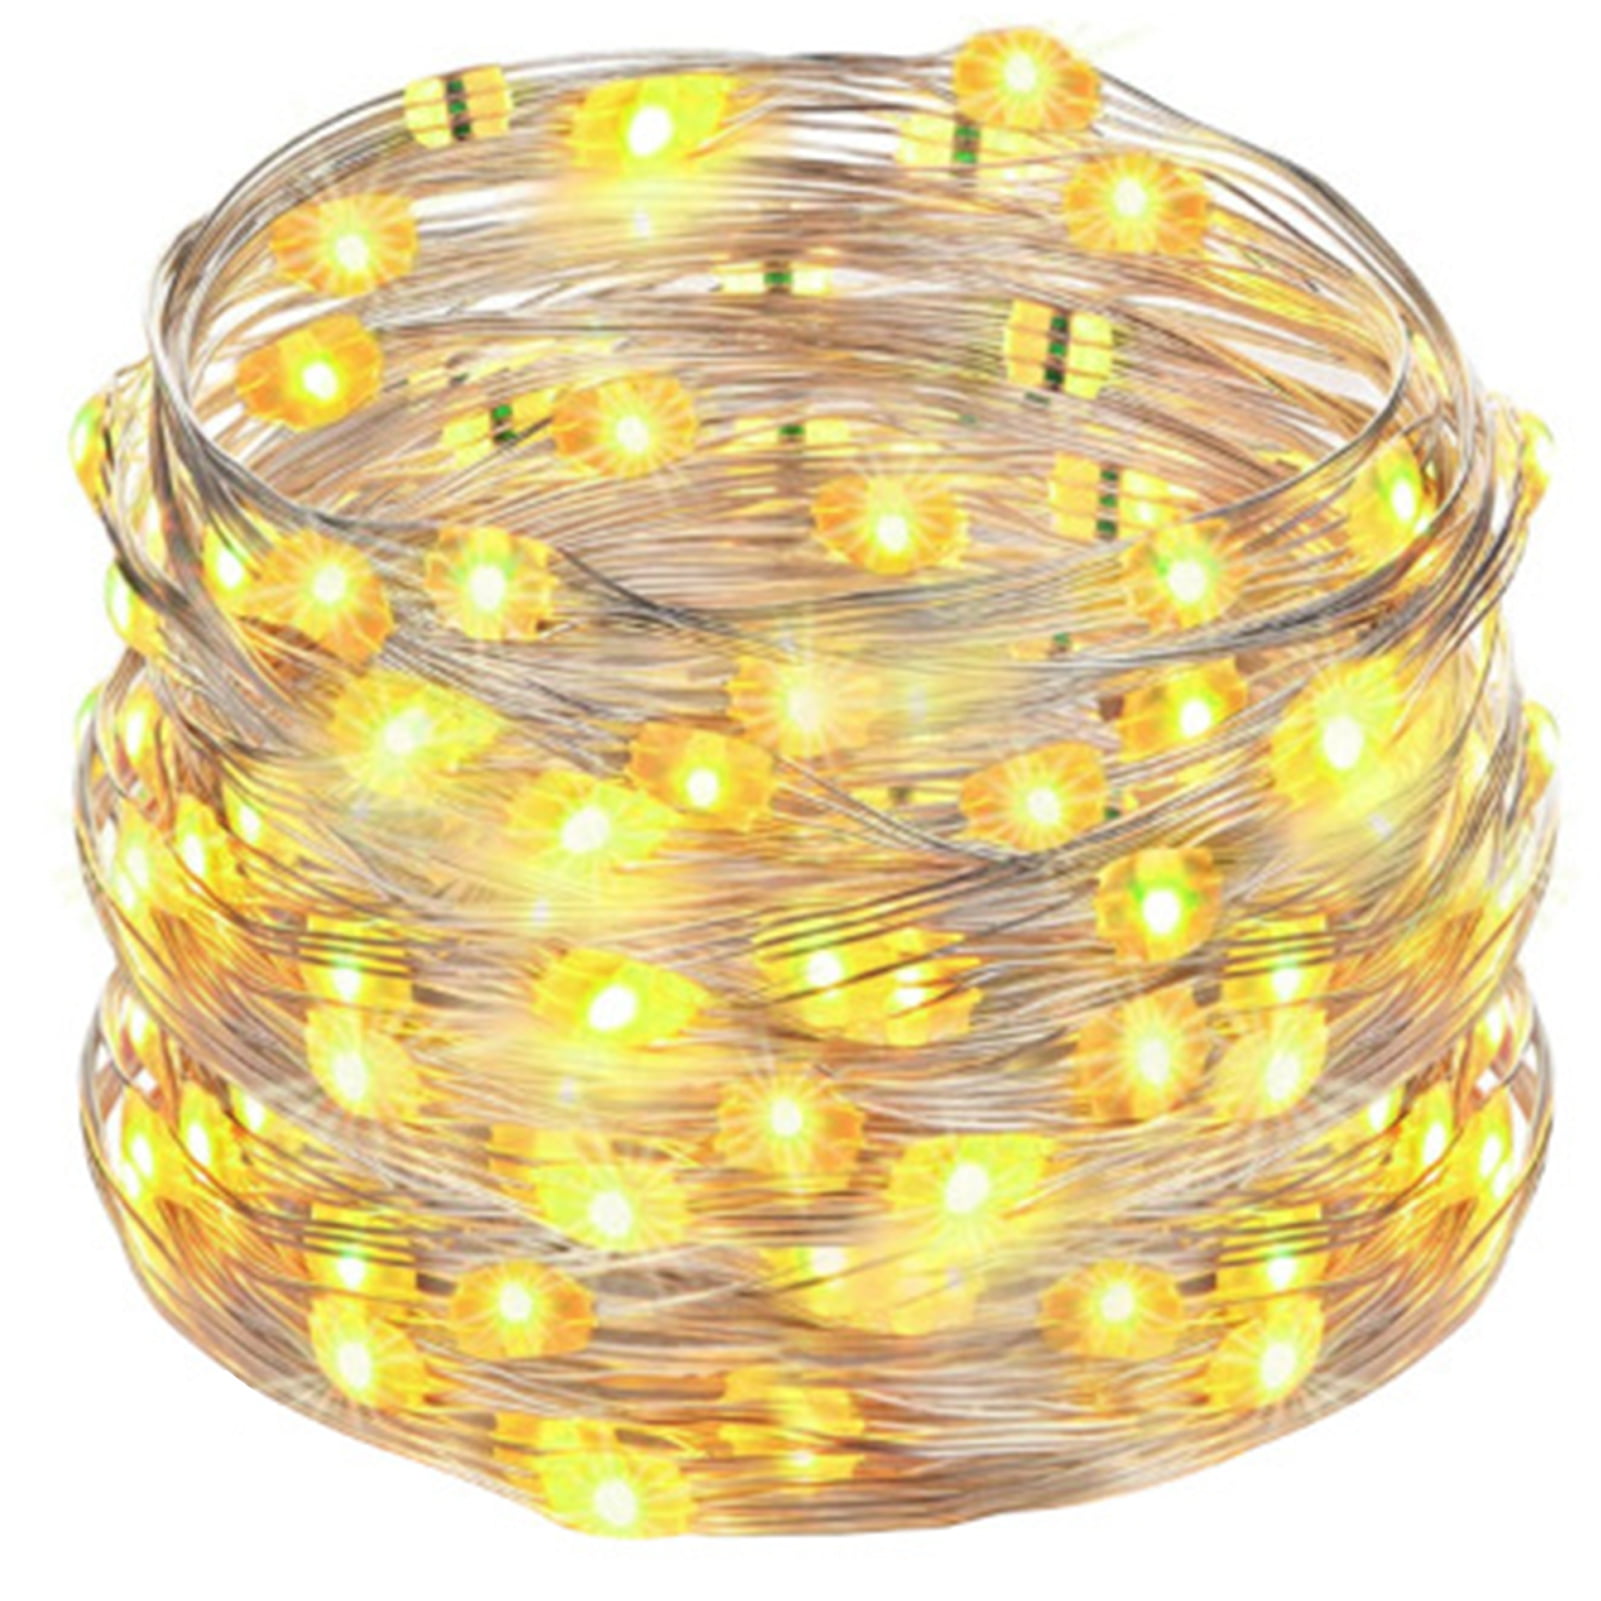 Details about   100 LED 10M String Light Mini LED Copper Xmas Fairy Party Strip Christmas Lamp 